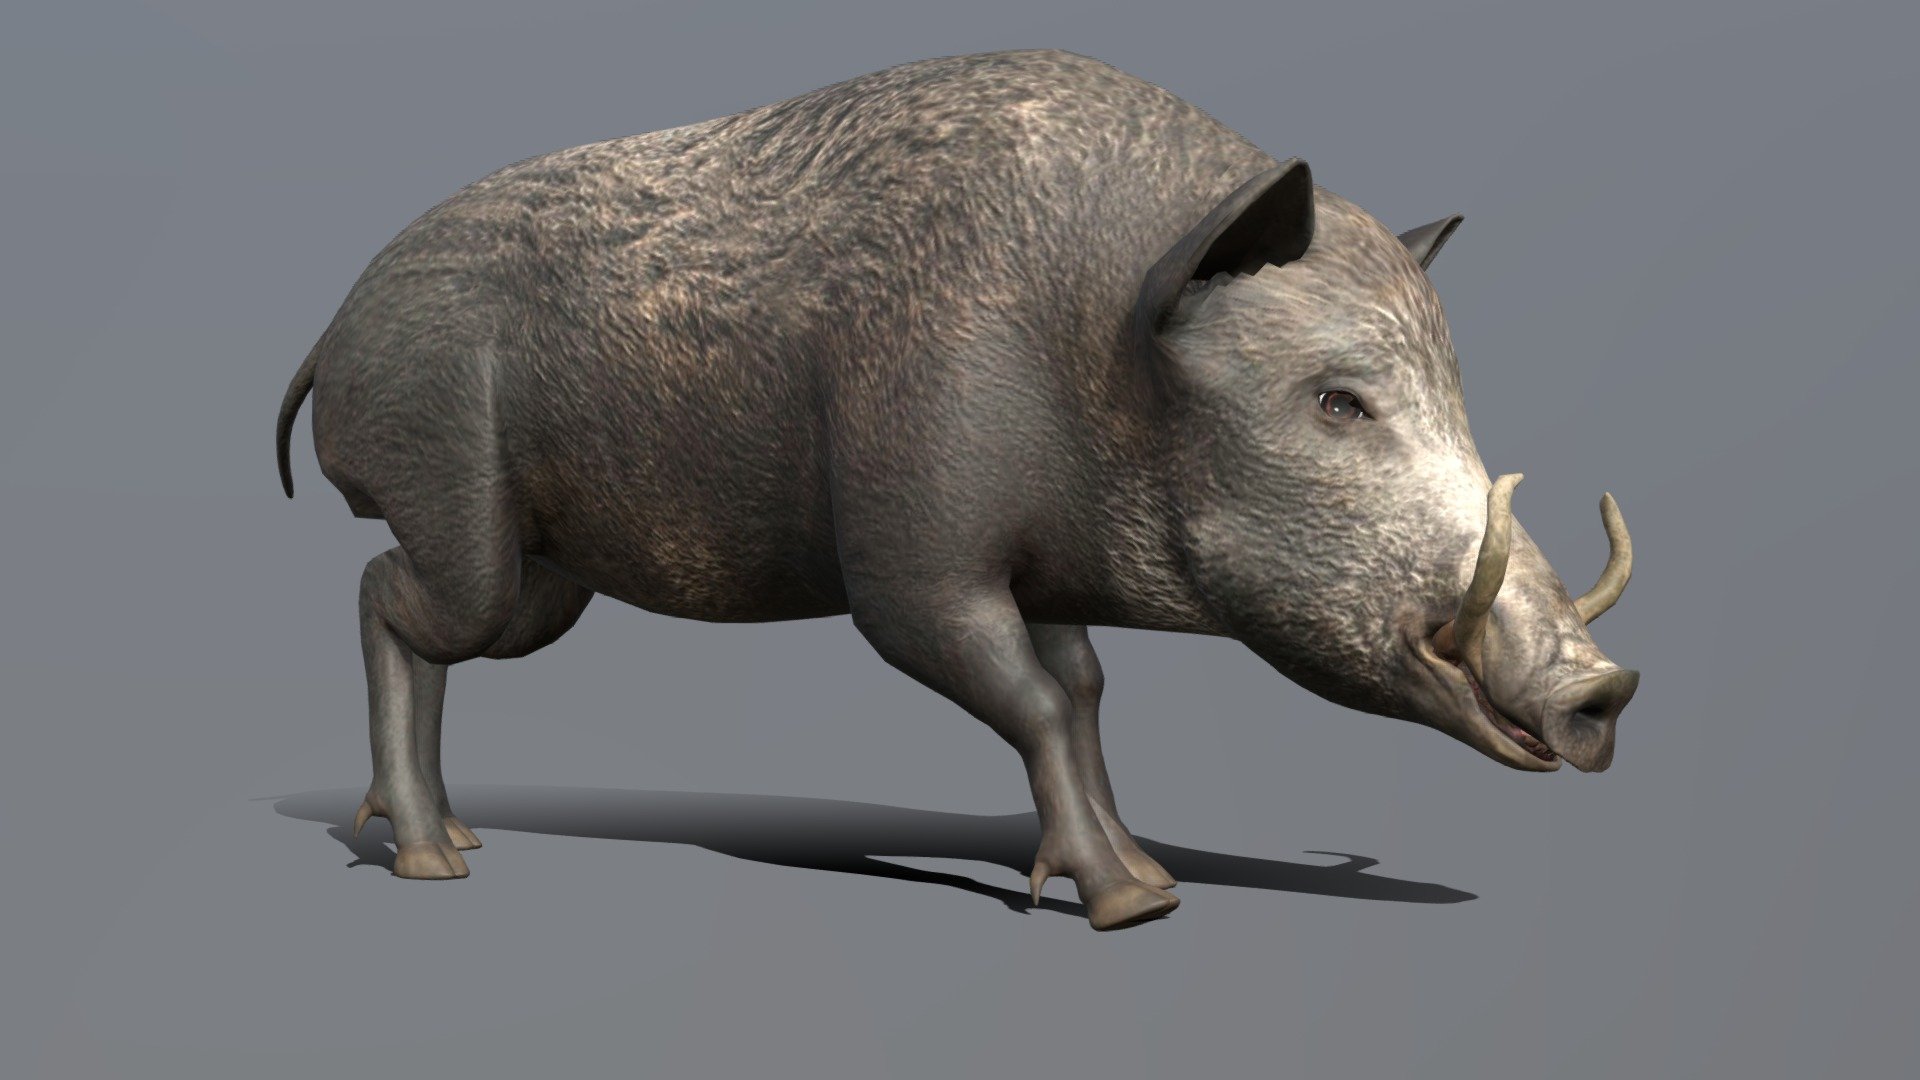 Animated Boar Walk cycle animation

fbx file format
lowpoly 3d model - Boar Walk cycle Animated - Buy Royalty Free 3D model by aaokiji 3d model